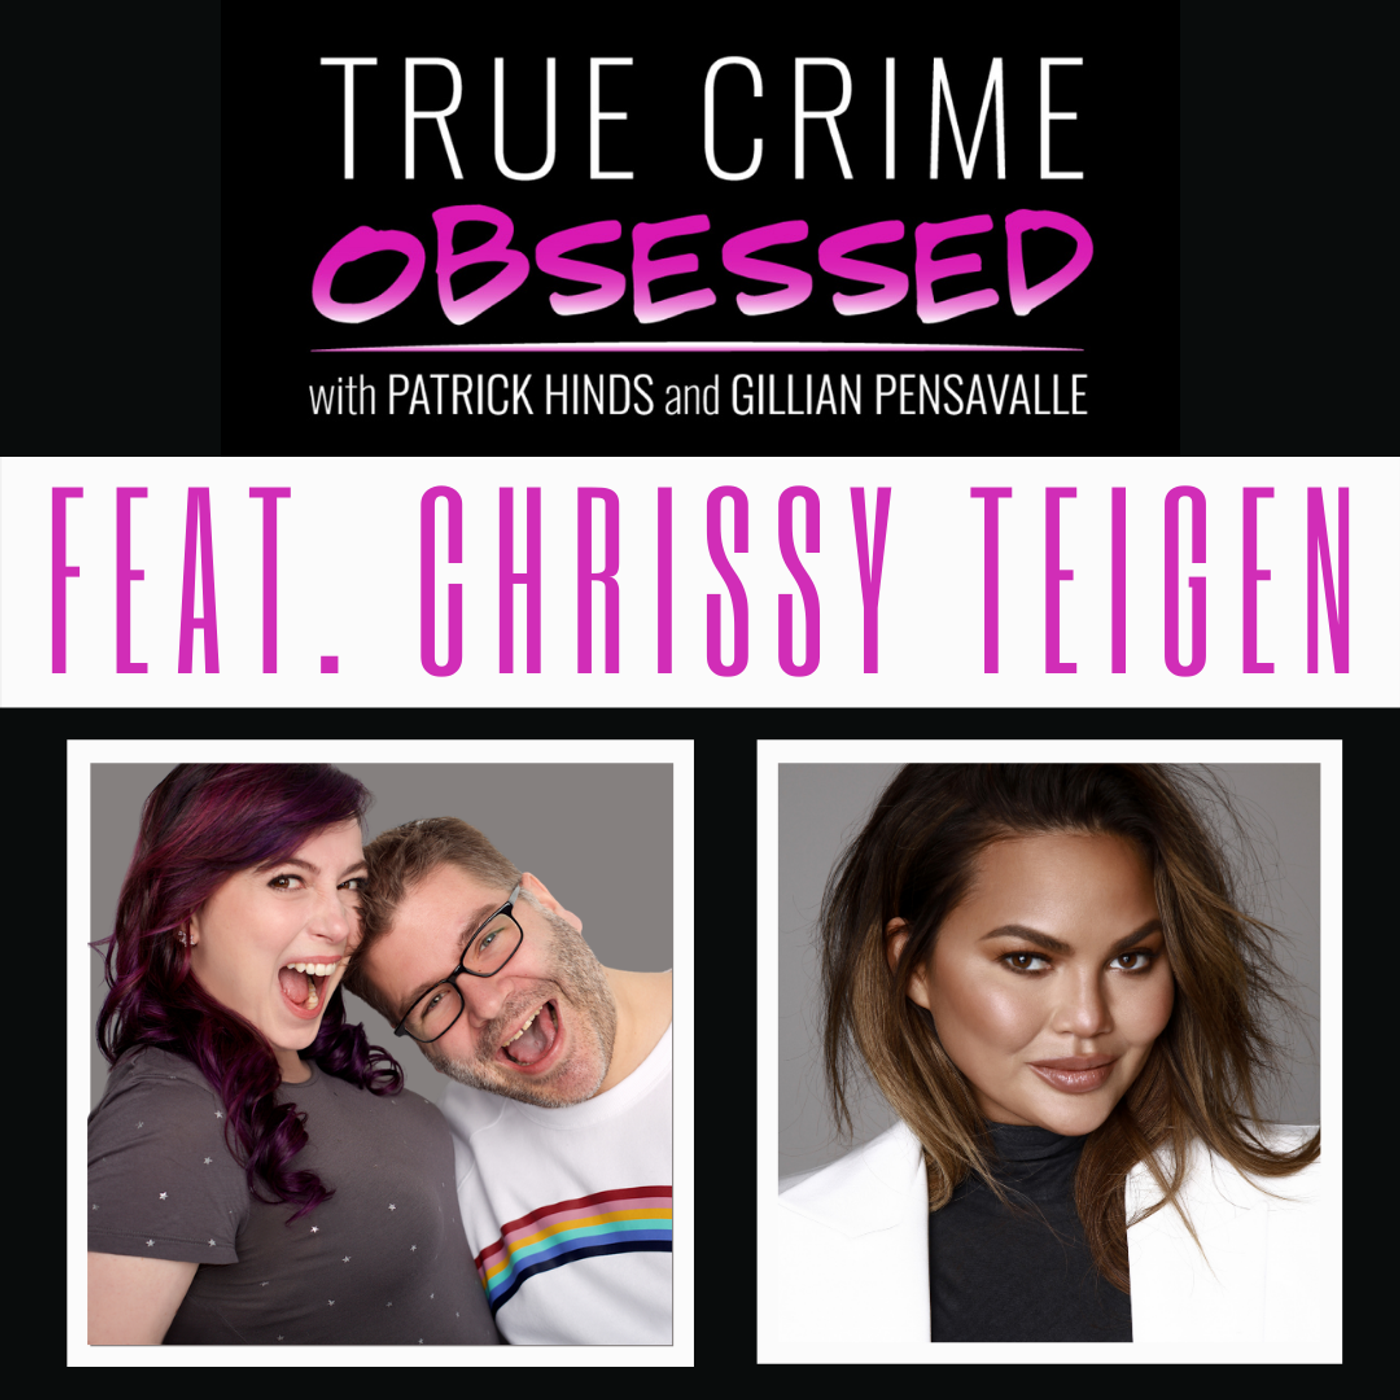 True Crime Obsessed Feat. Chrissy Teigen by True Crime Obsessed